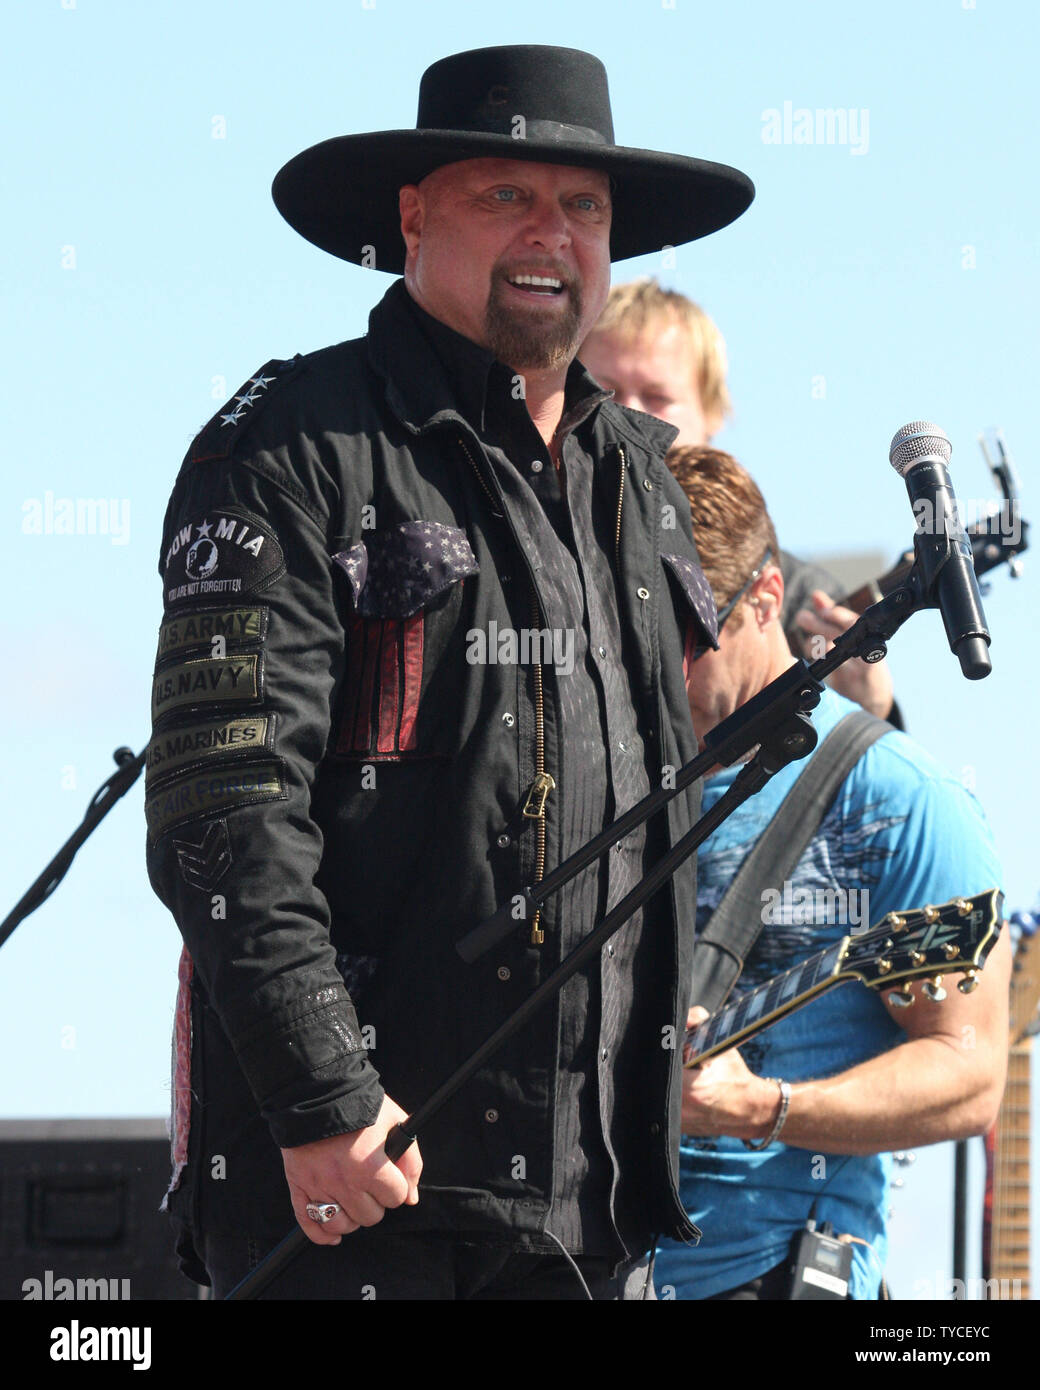 Eddie Montgomery of the country music duo Montgomery Gentry perfoms before the start of the NASCAR Sprint Cup Series Sylvania 300 at New Hampshire Motor Speedway in Loudon, New Hampshire on September 25, 2011.  UPI/Malcolm Hope Stock Photo